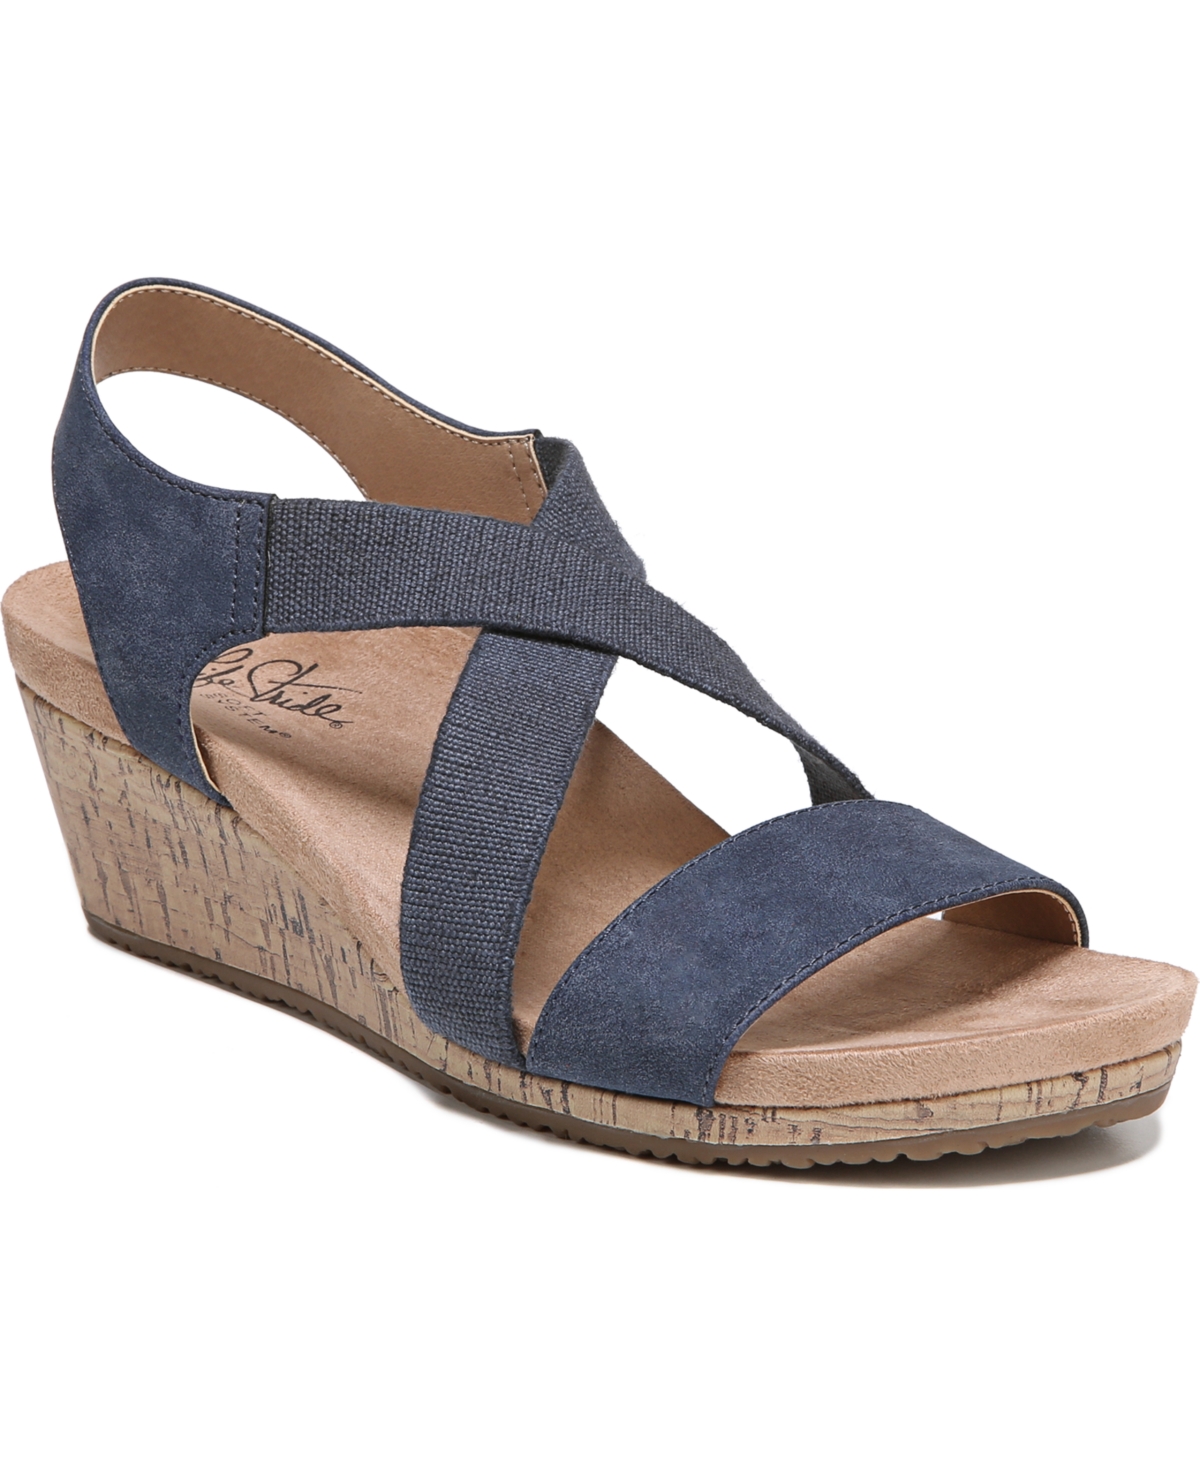 Women's Mexico Wedge Sandals - Navy